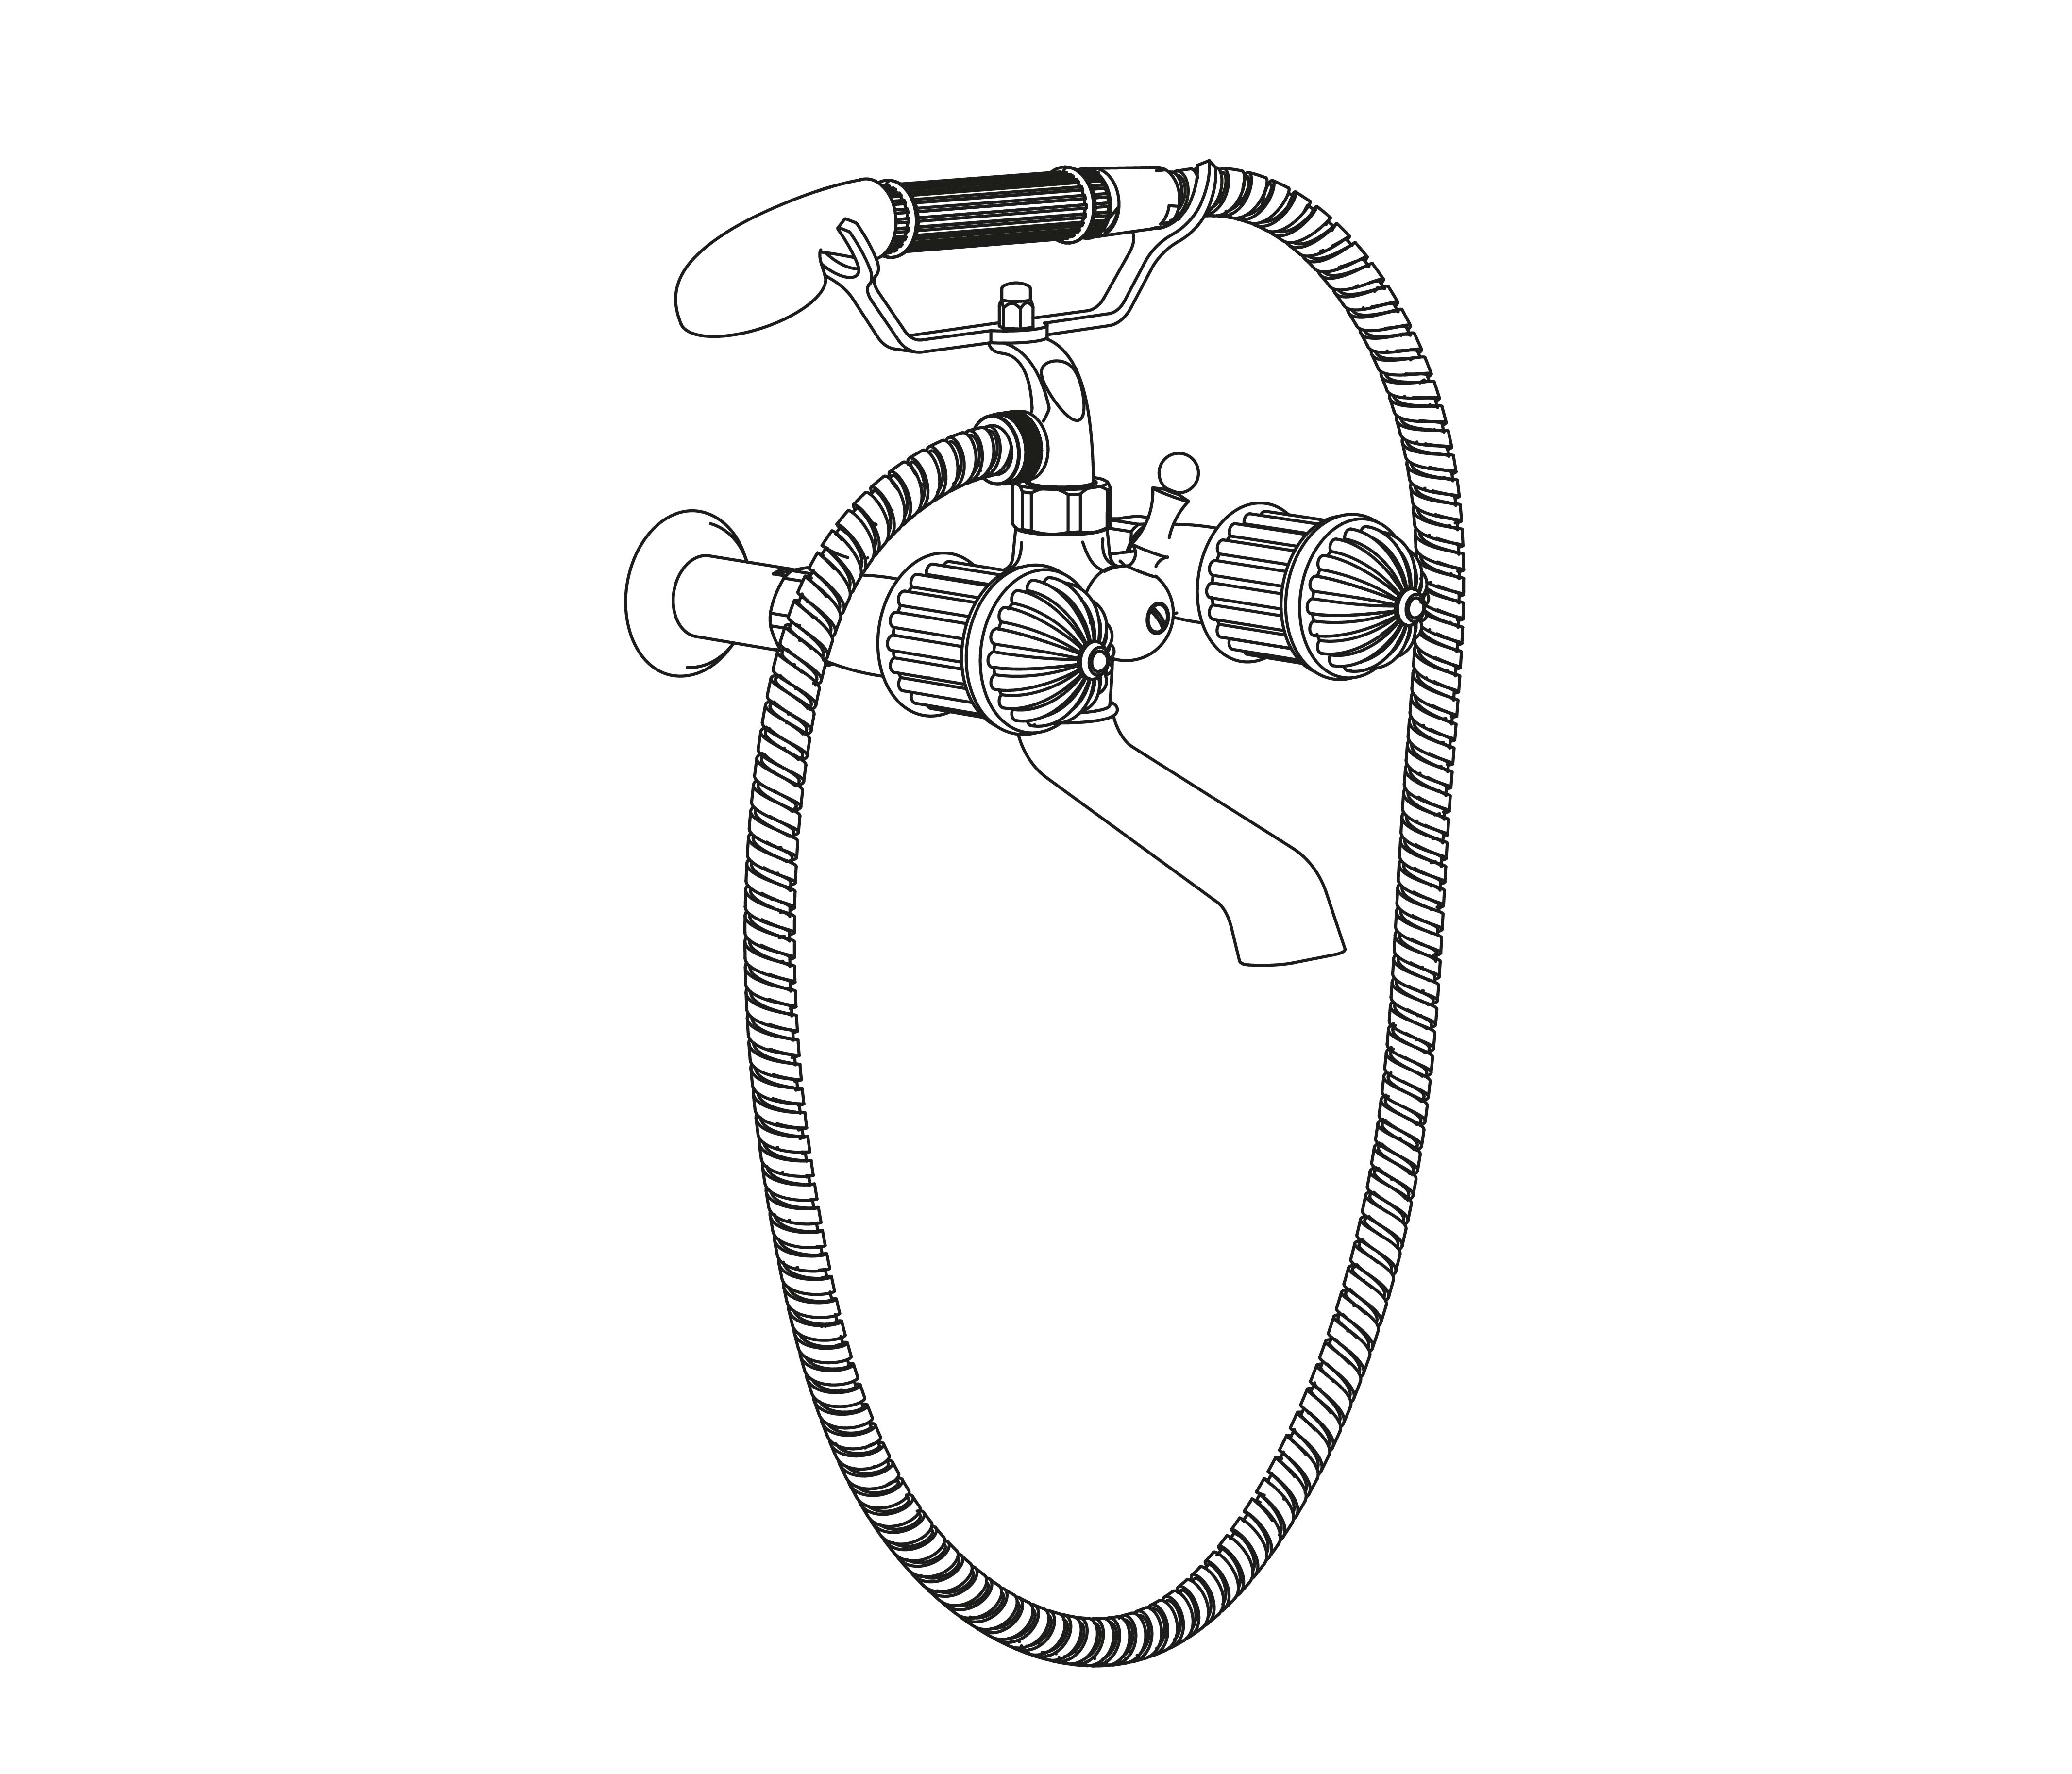 S181-3201 Wall mounted bath and shower mixer